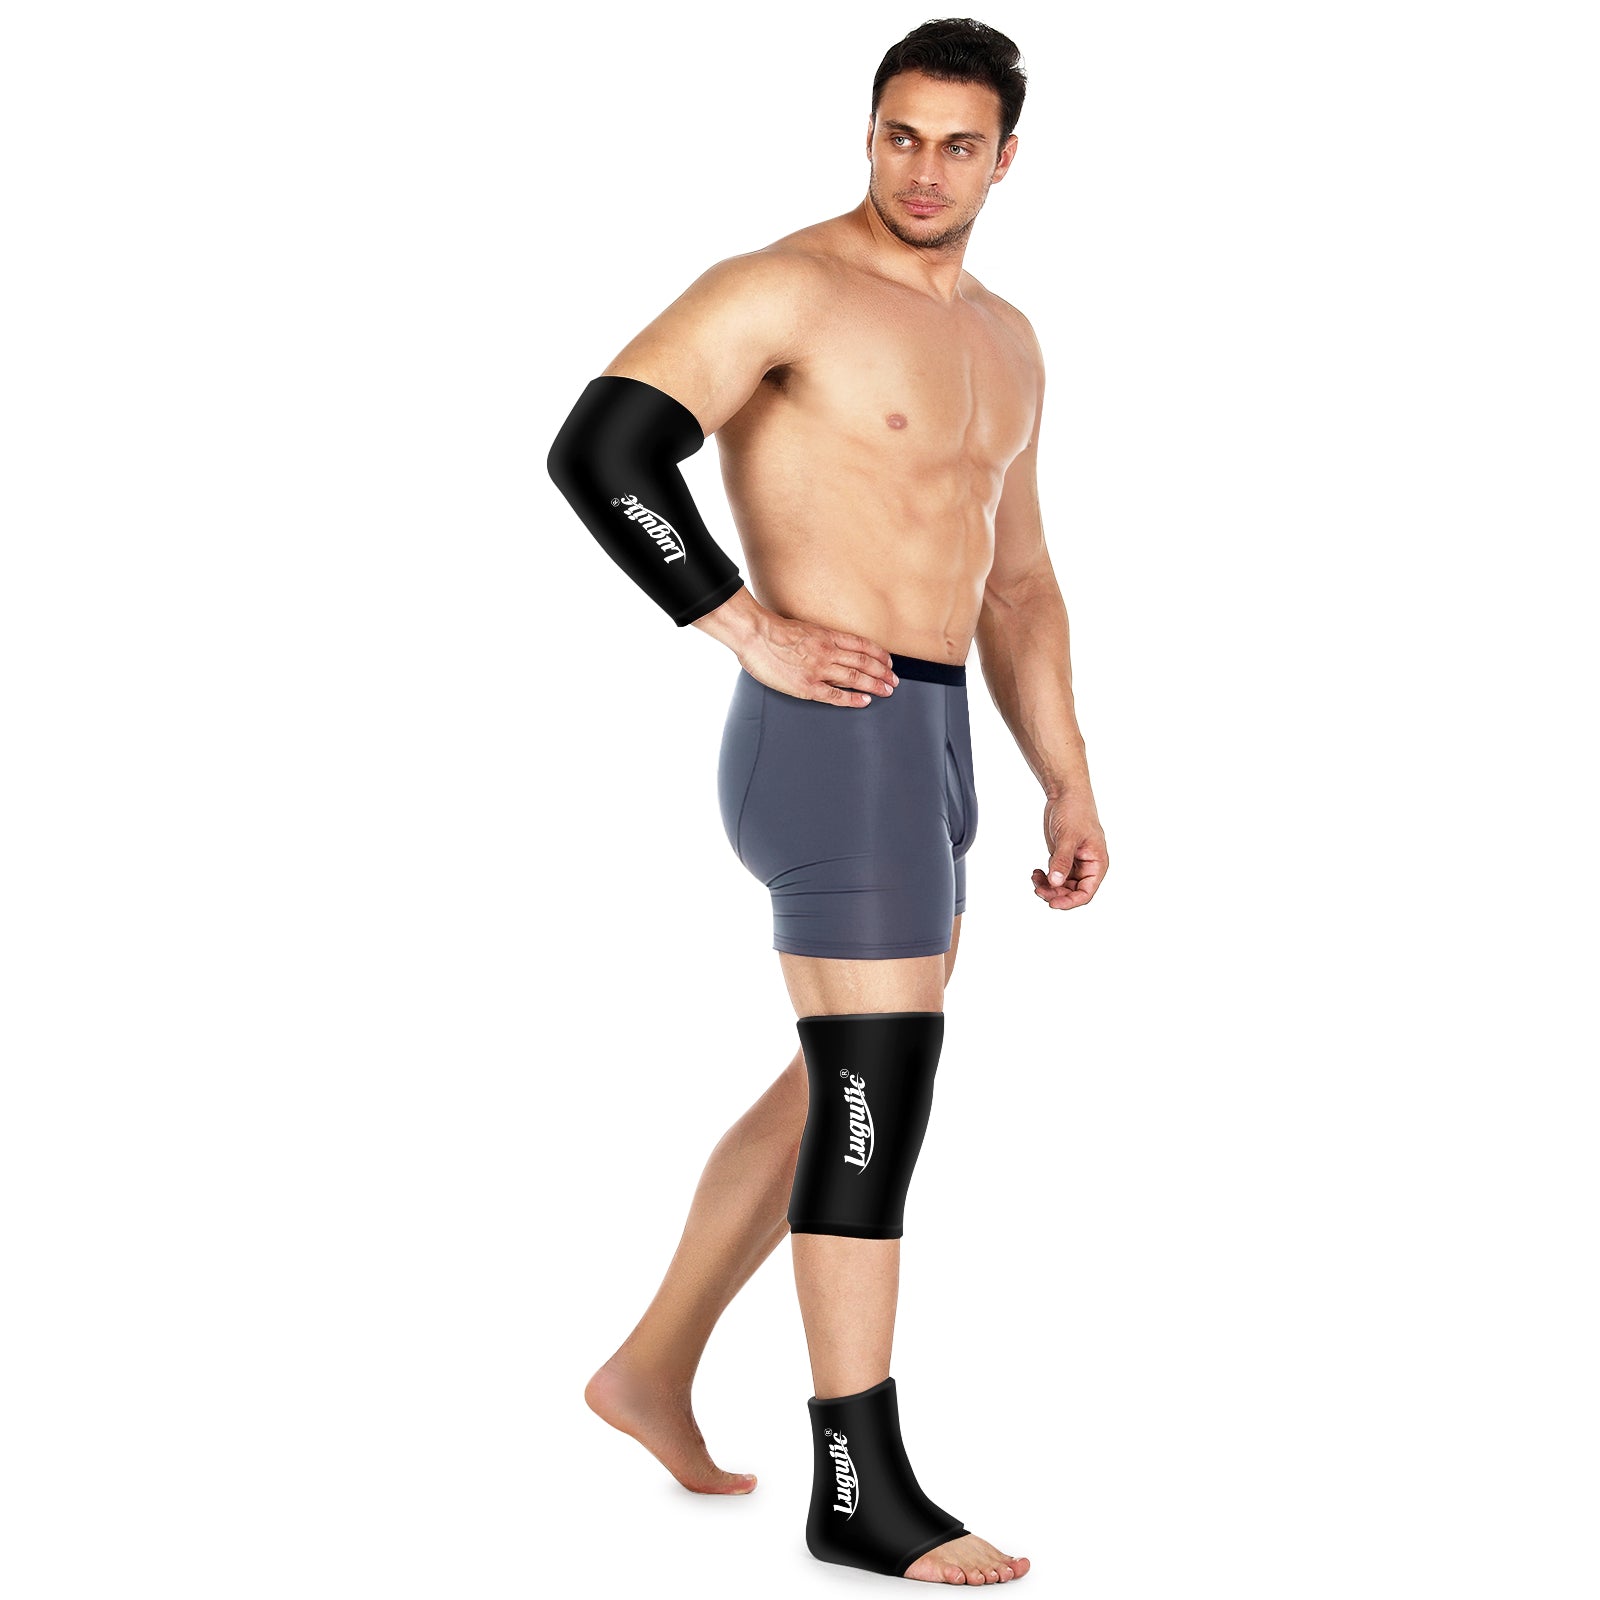 Luguiic Knee & Elbow Ice Pack for Injuries